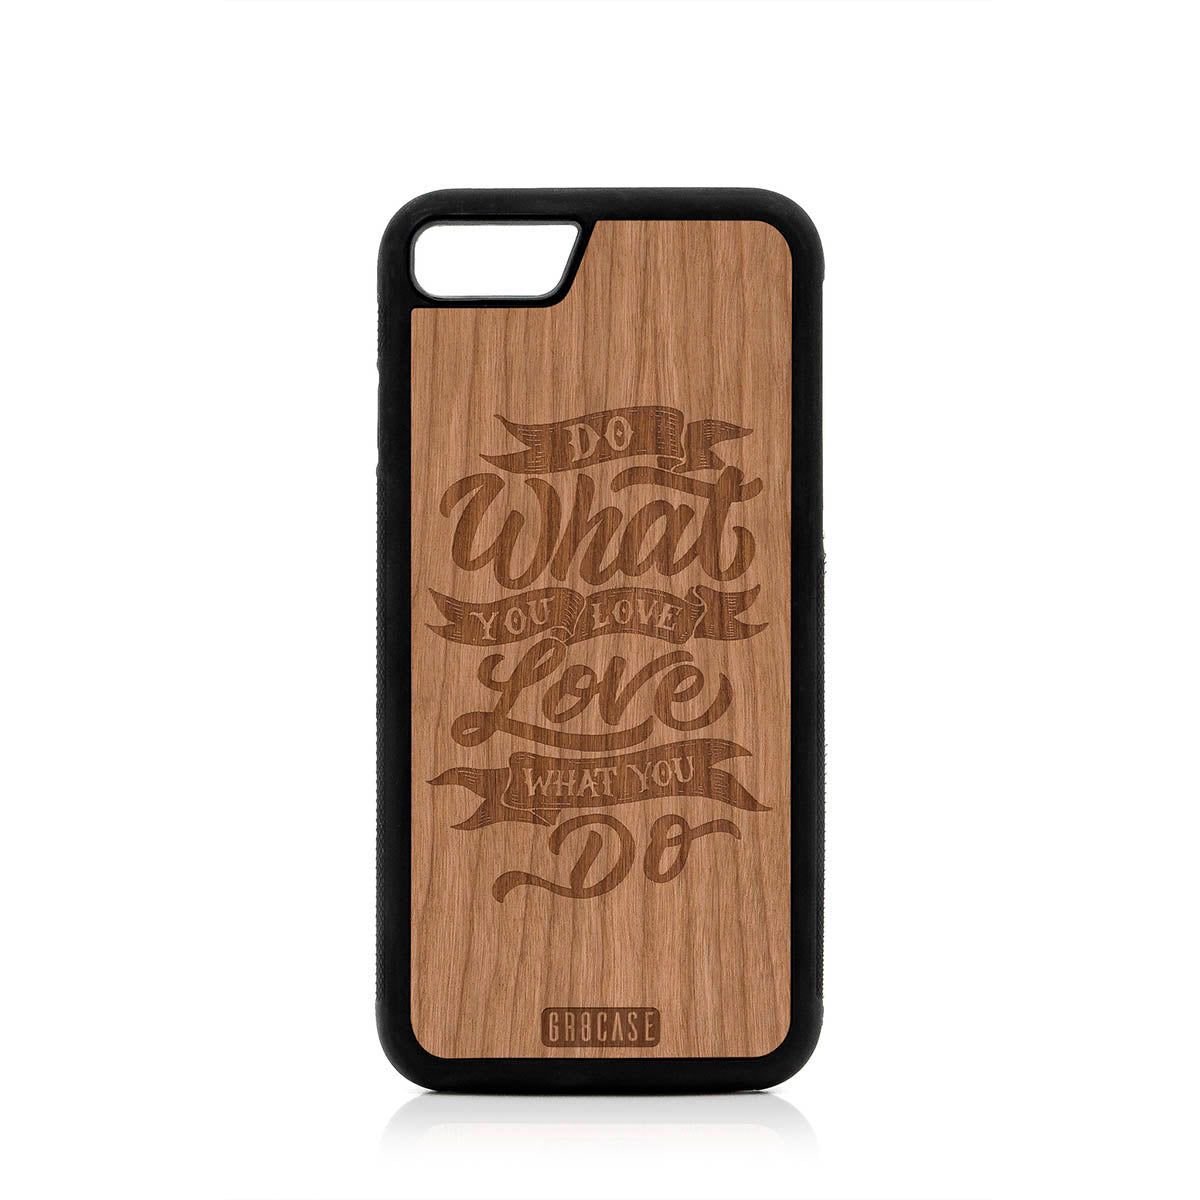 Do What You Love Love What You Do Design Wood Case For iPhone 7/8 by GR8CASE